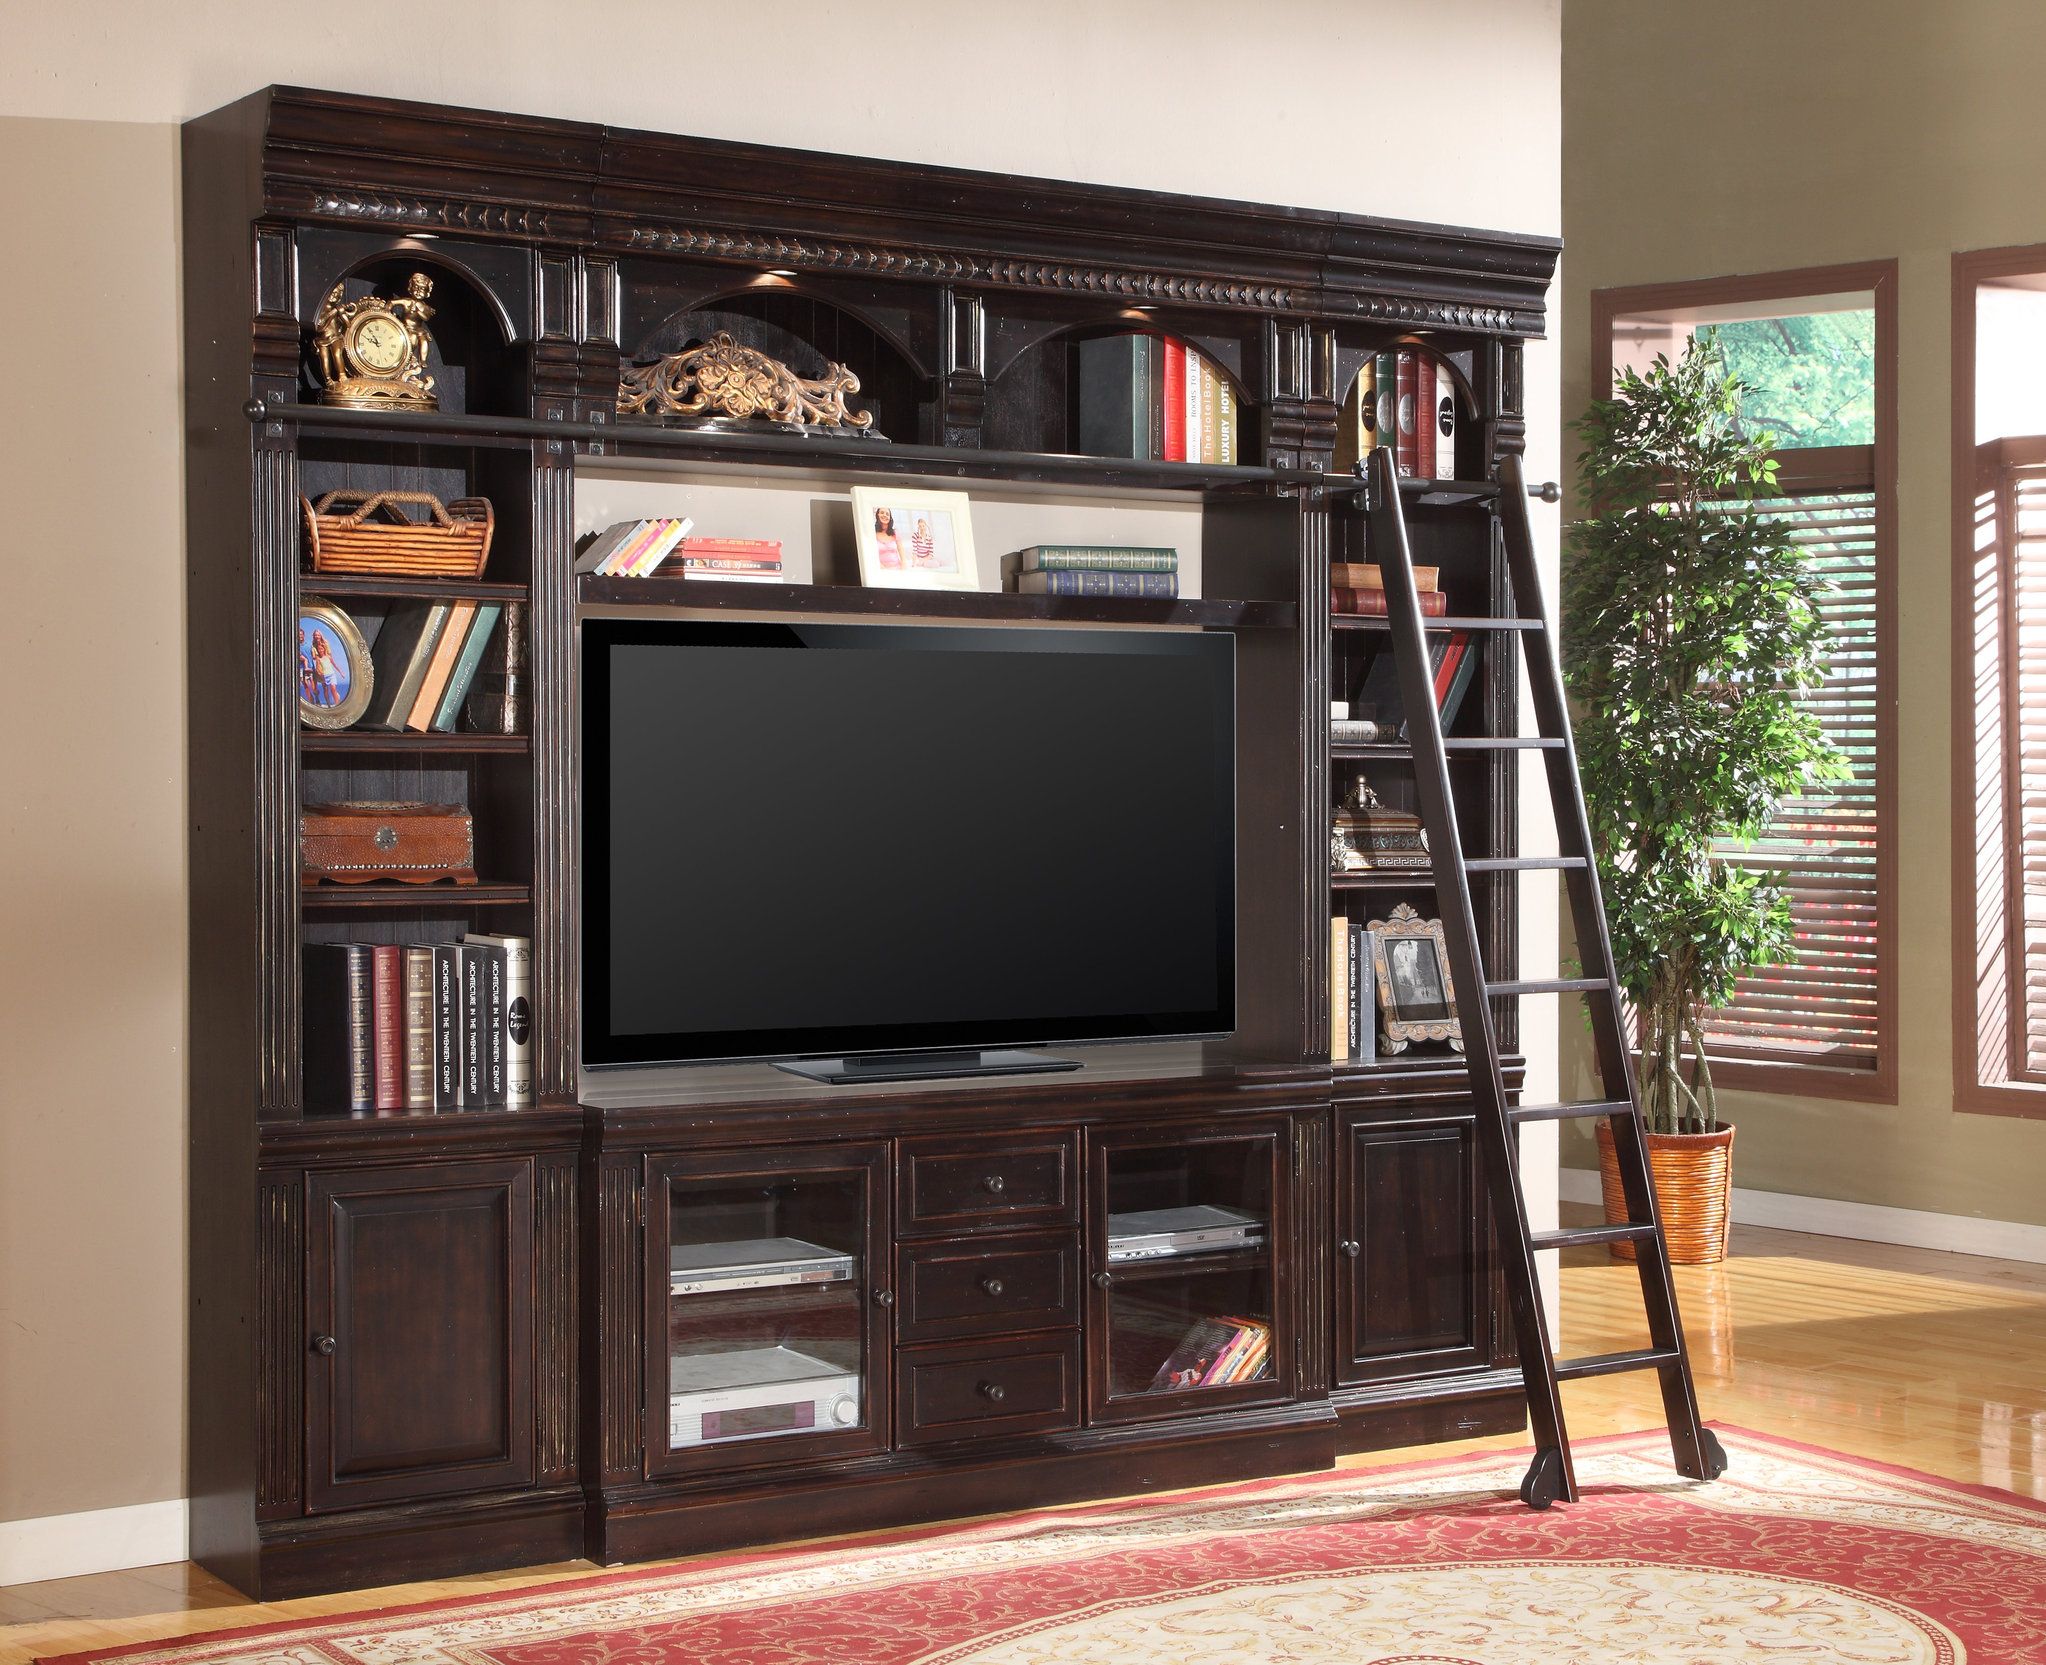 The Venezia Library 4 Piece Space Saver Wall Unti For 60 In 60 Inch Tv Wall Units (View 6 of 15)